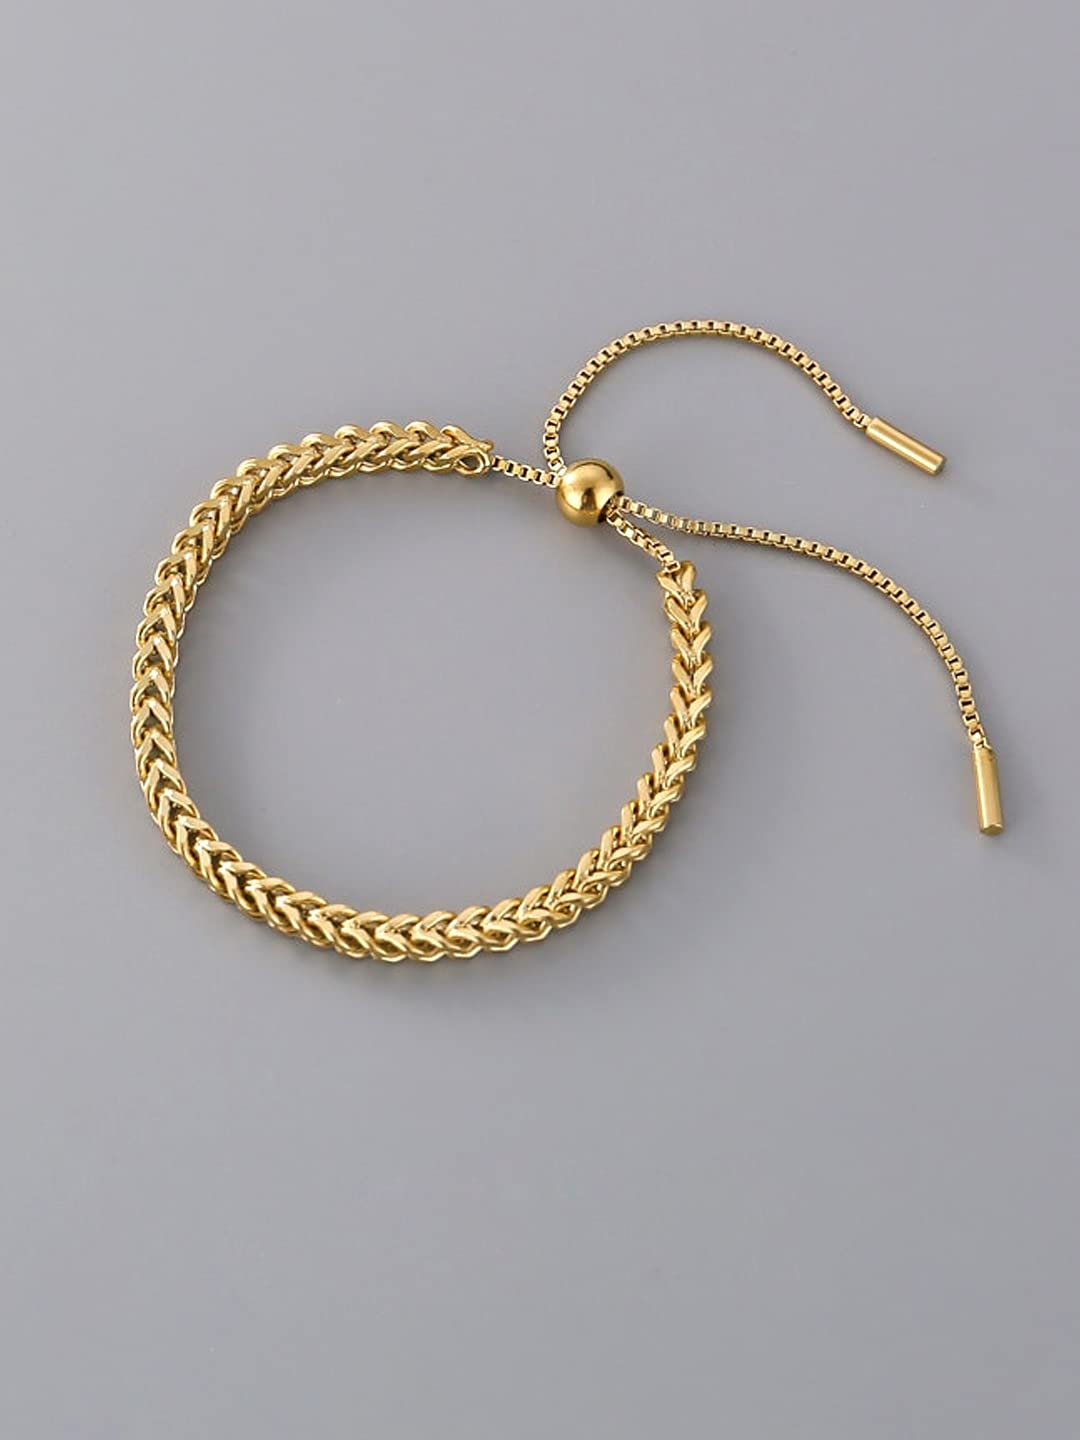 Yellow Chimes Chain Bracelet for Women Gold Plated Adjustable Drawstring Stainless Steel Chain Bracelet for Women and Girls